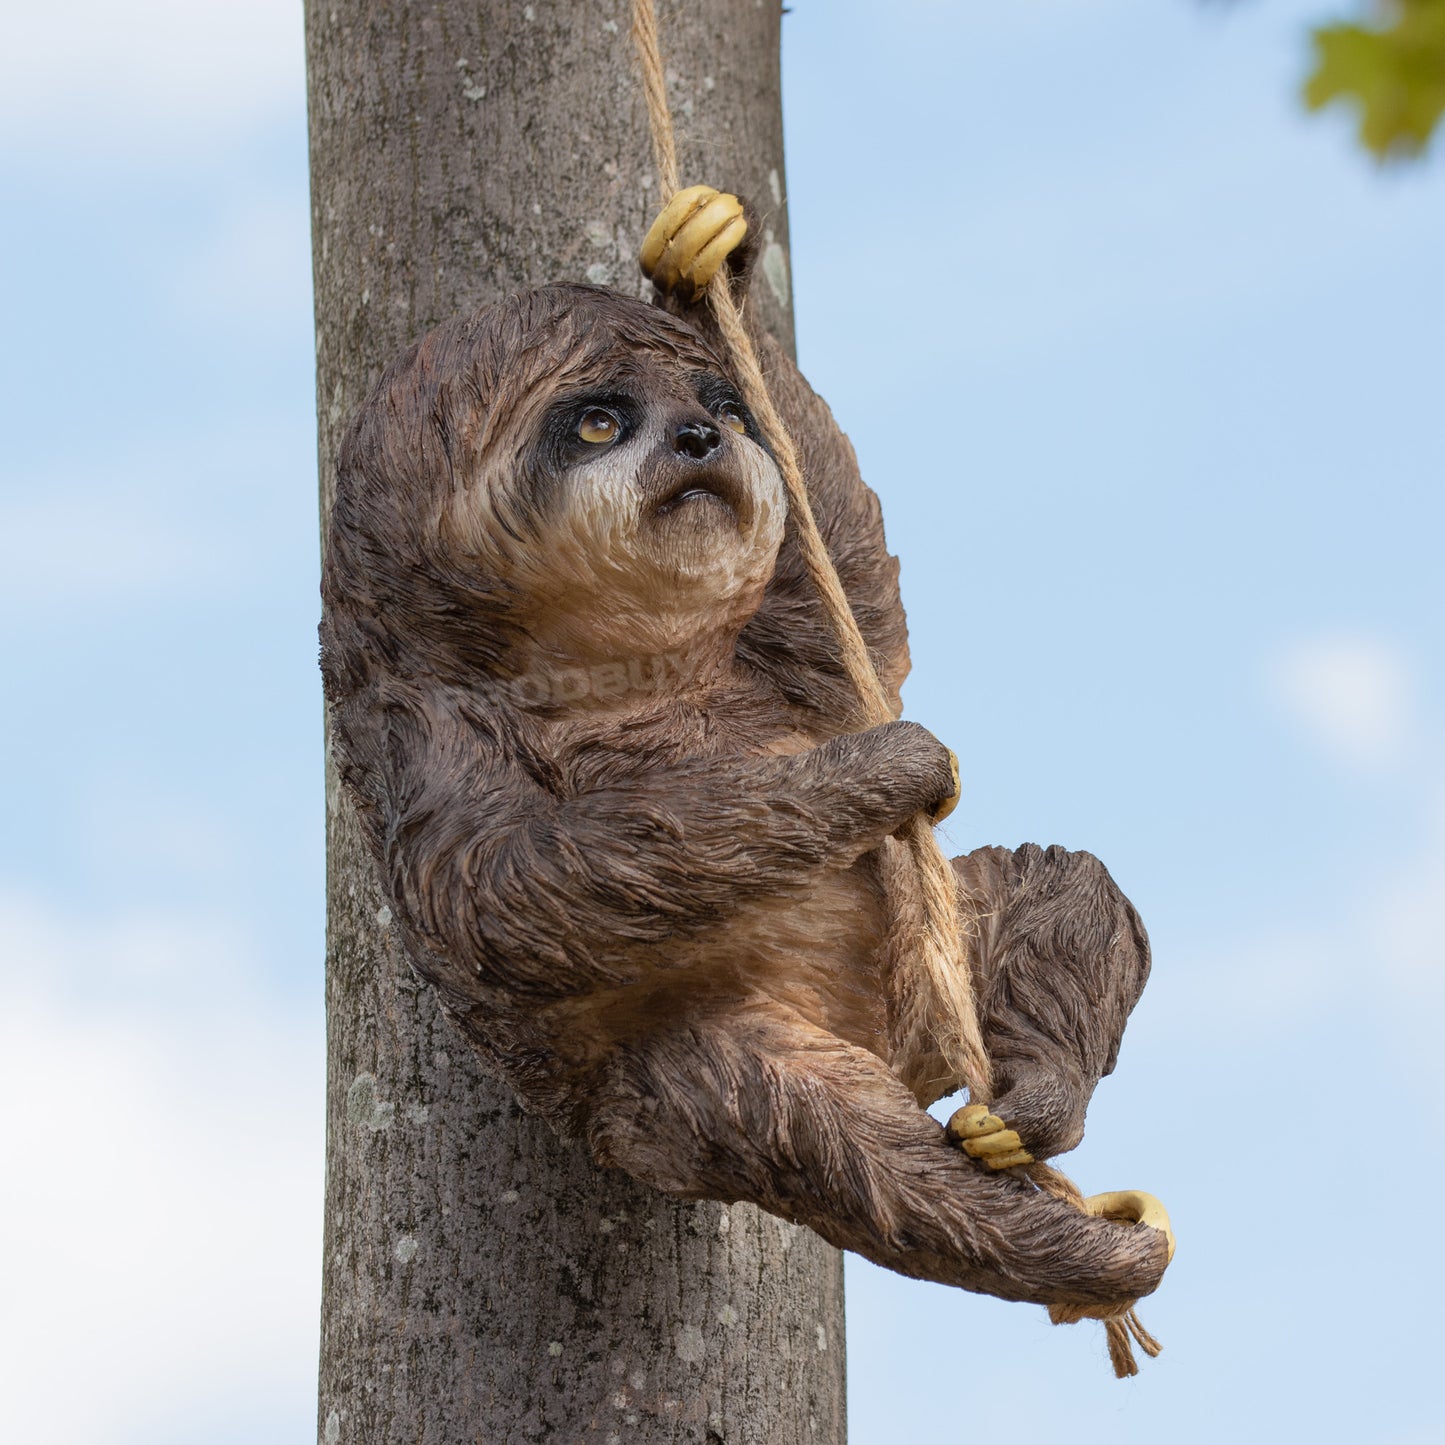 Climbing Sloth Garden Ornament On Rope Tree Branch Hanging